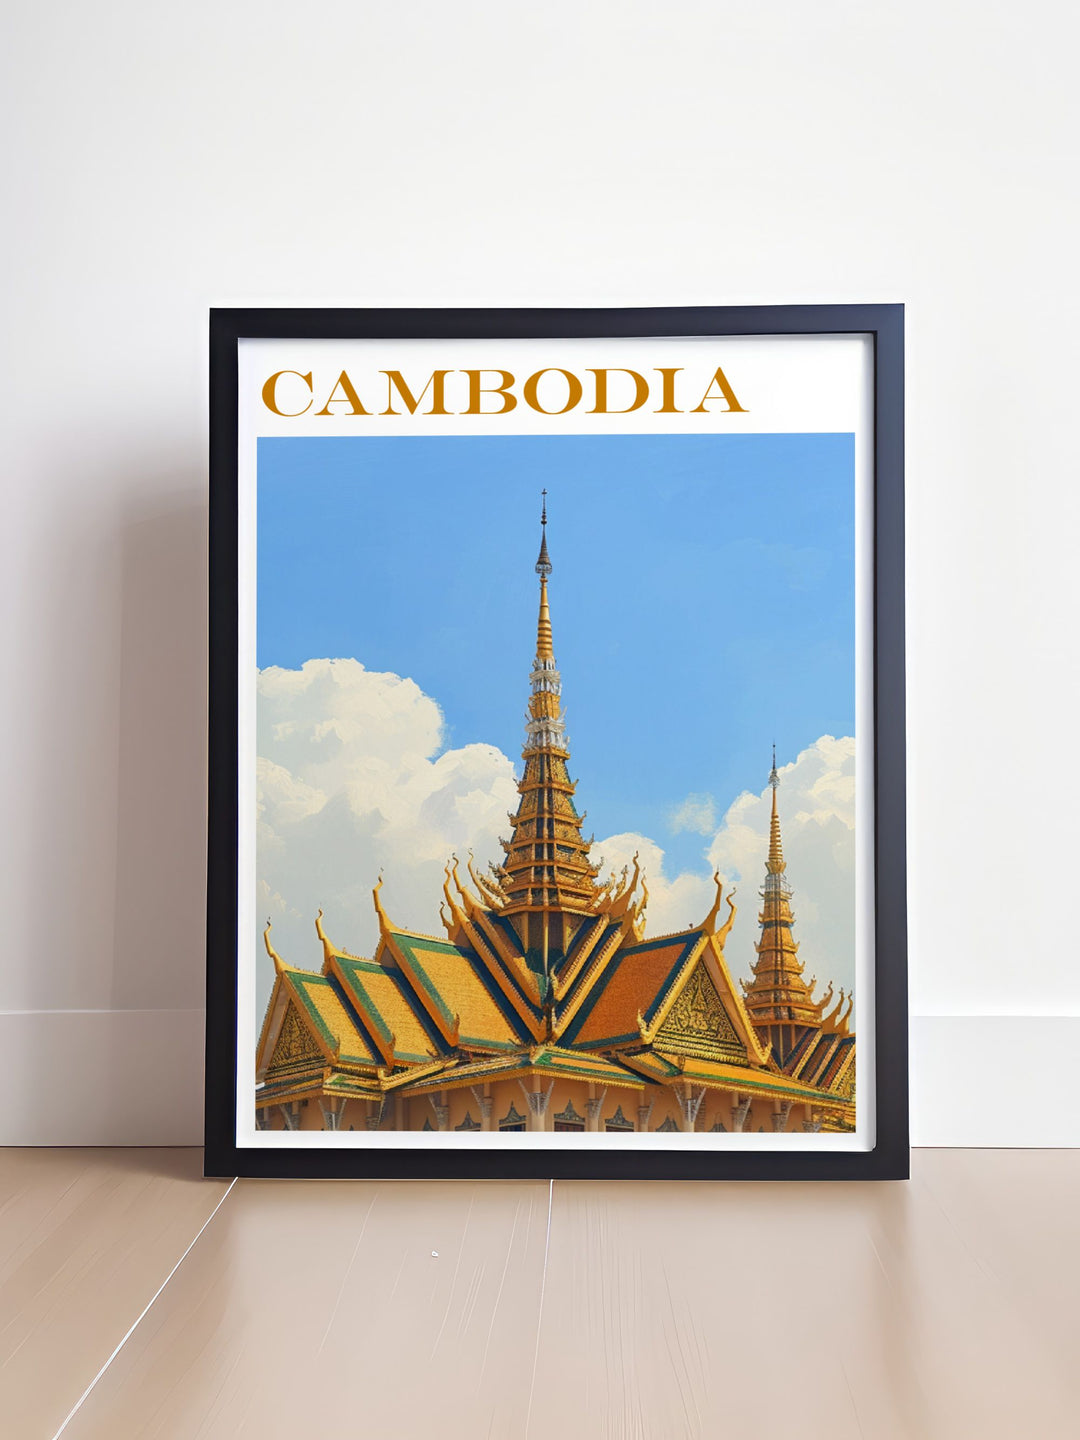 Elegant Royal Palace artwork in a vintage print style capturing the timeless beauty of Cambodias historic site ideal for wall art and home decor.